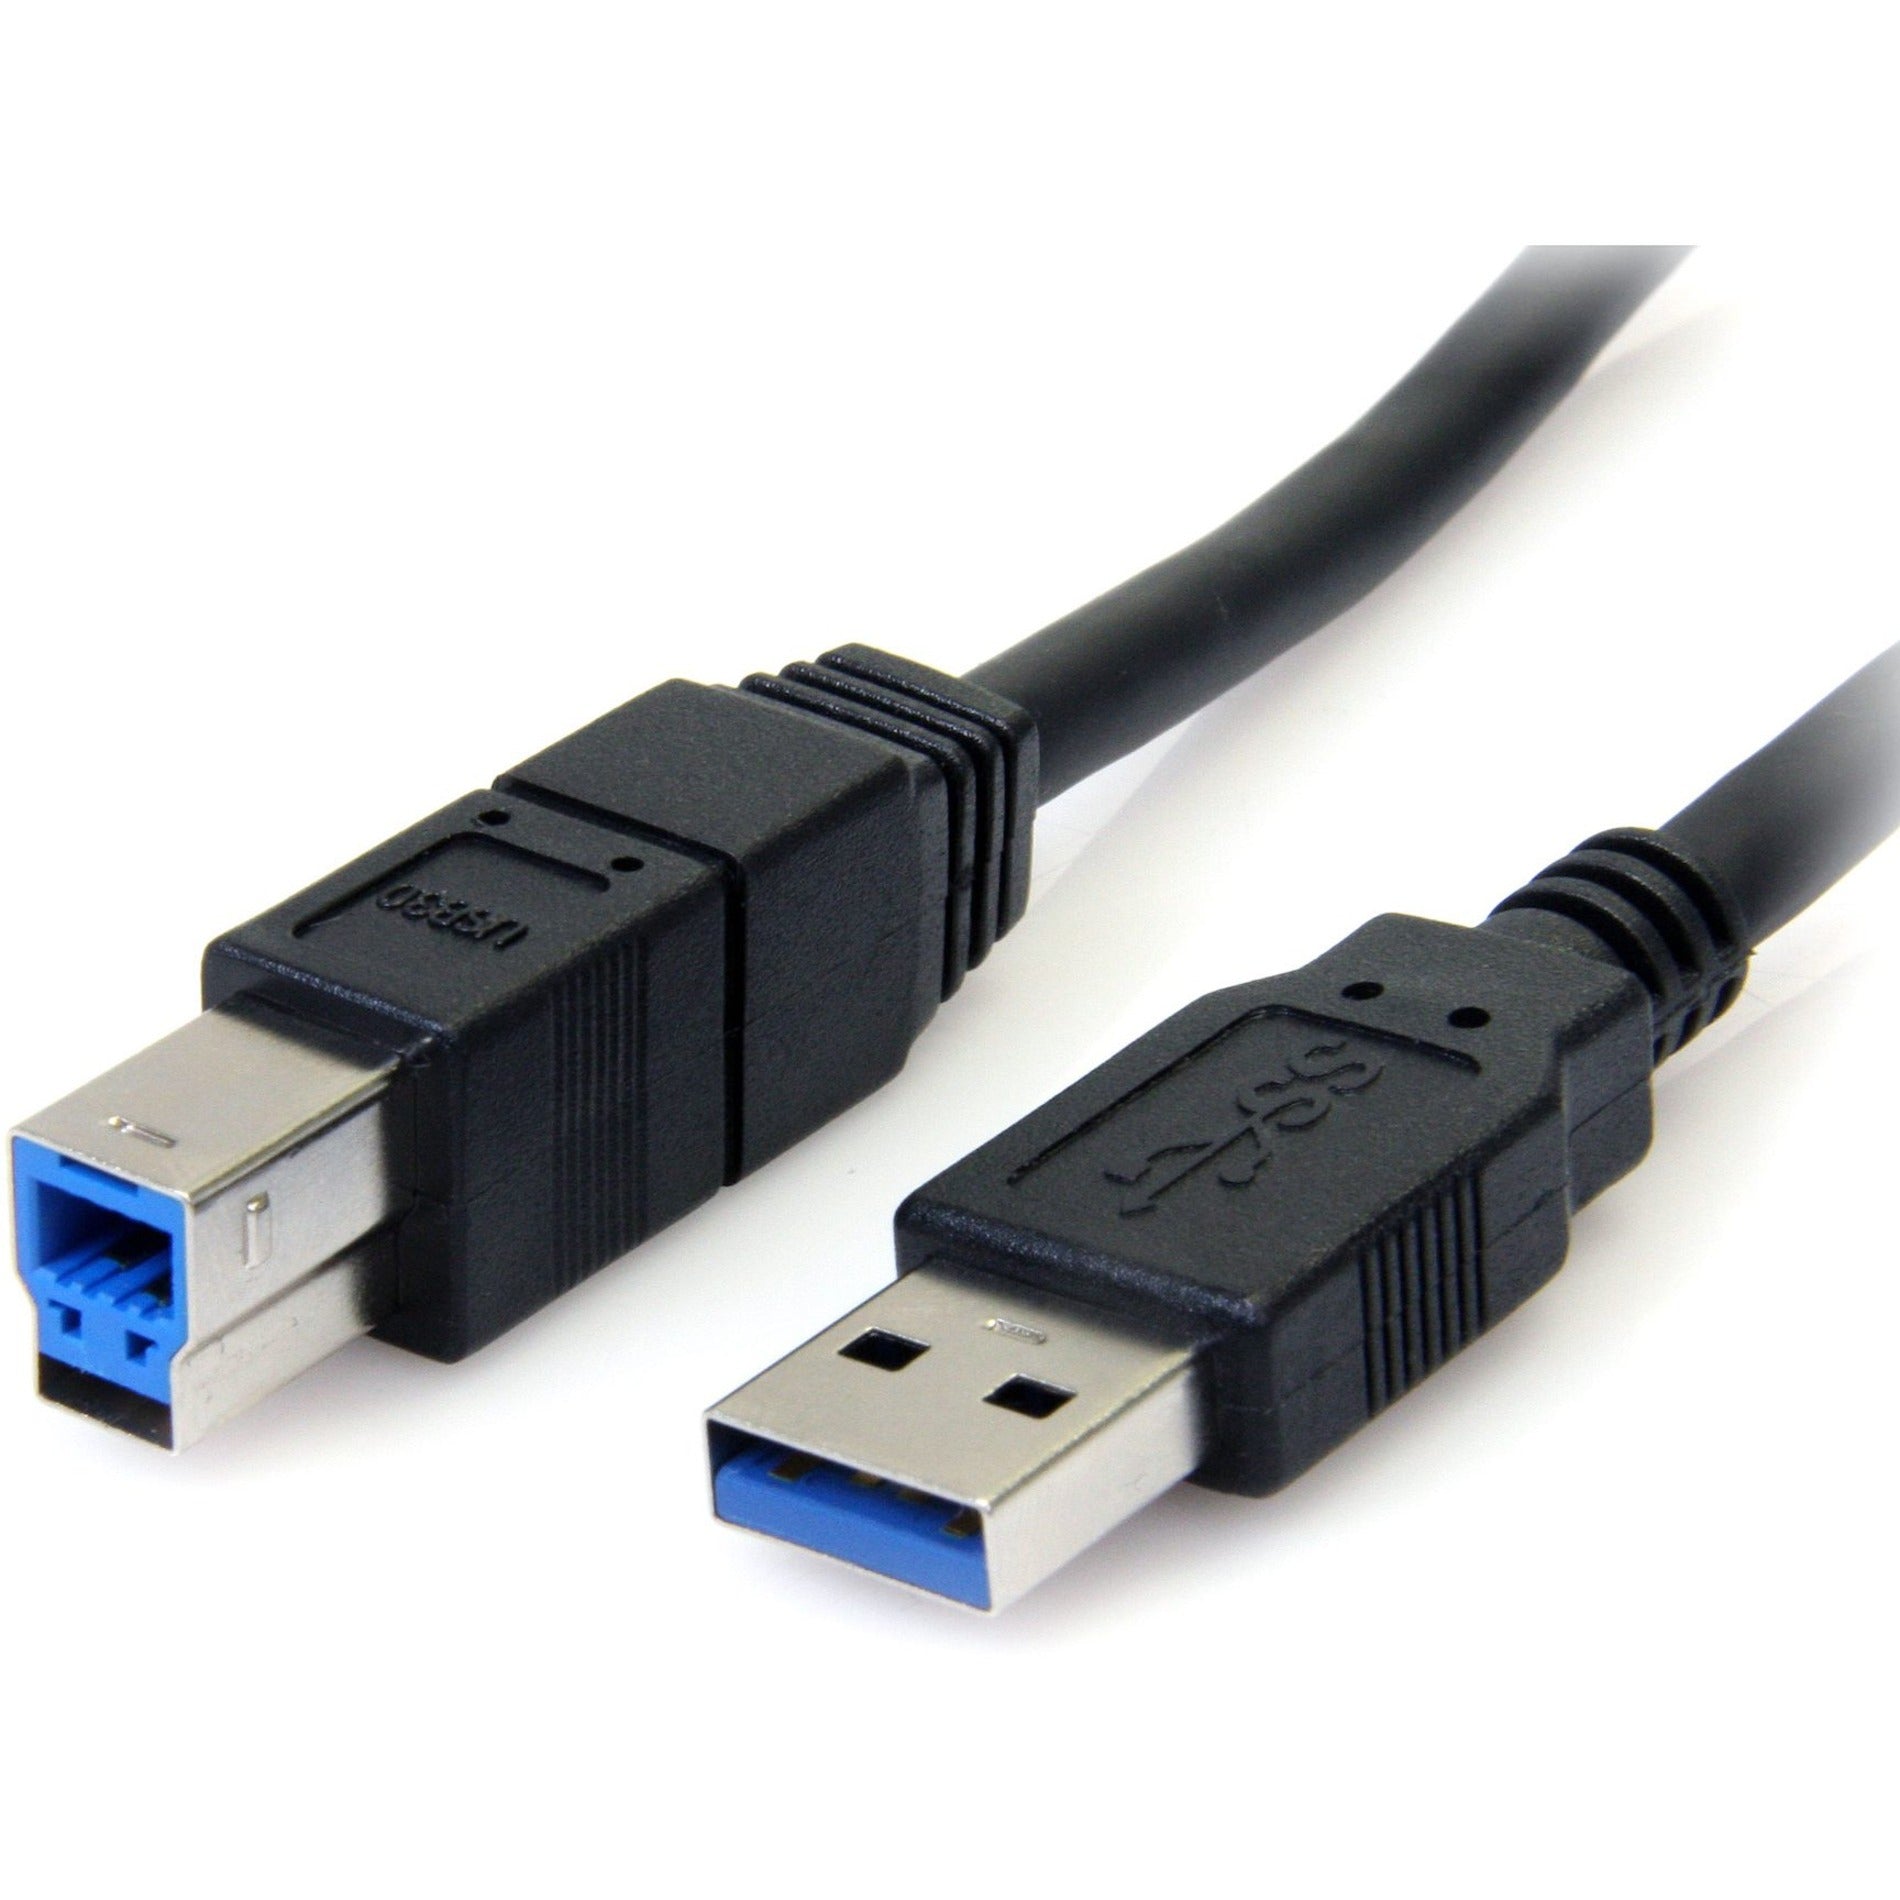 StarTech.com USB3SAB10BK 10 ft Black SuperSpeed USB 3.0 Cable A to B - M/M, High-Speed Data Transfer, Lifetime Warranty